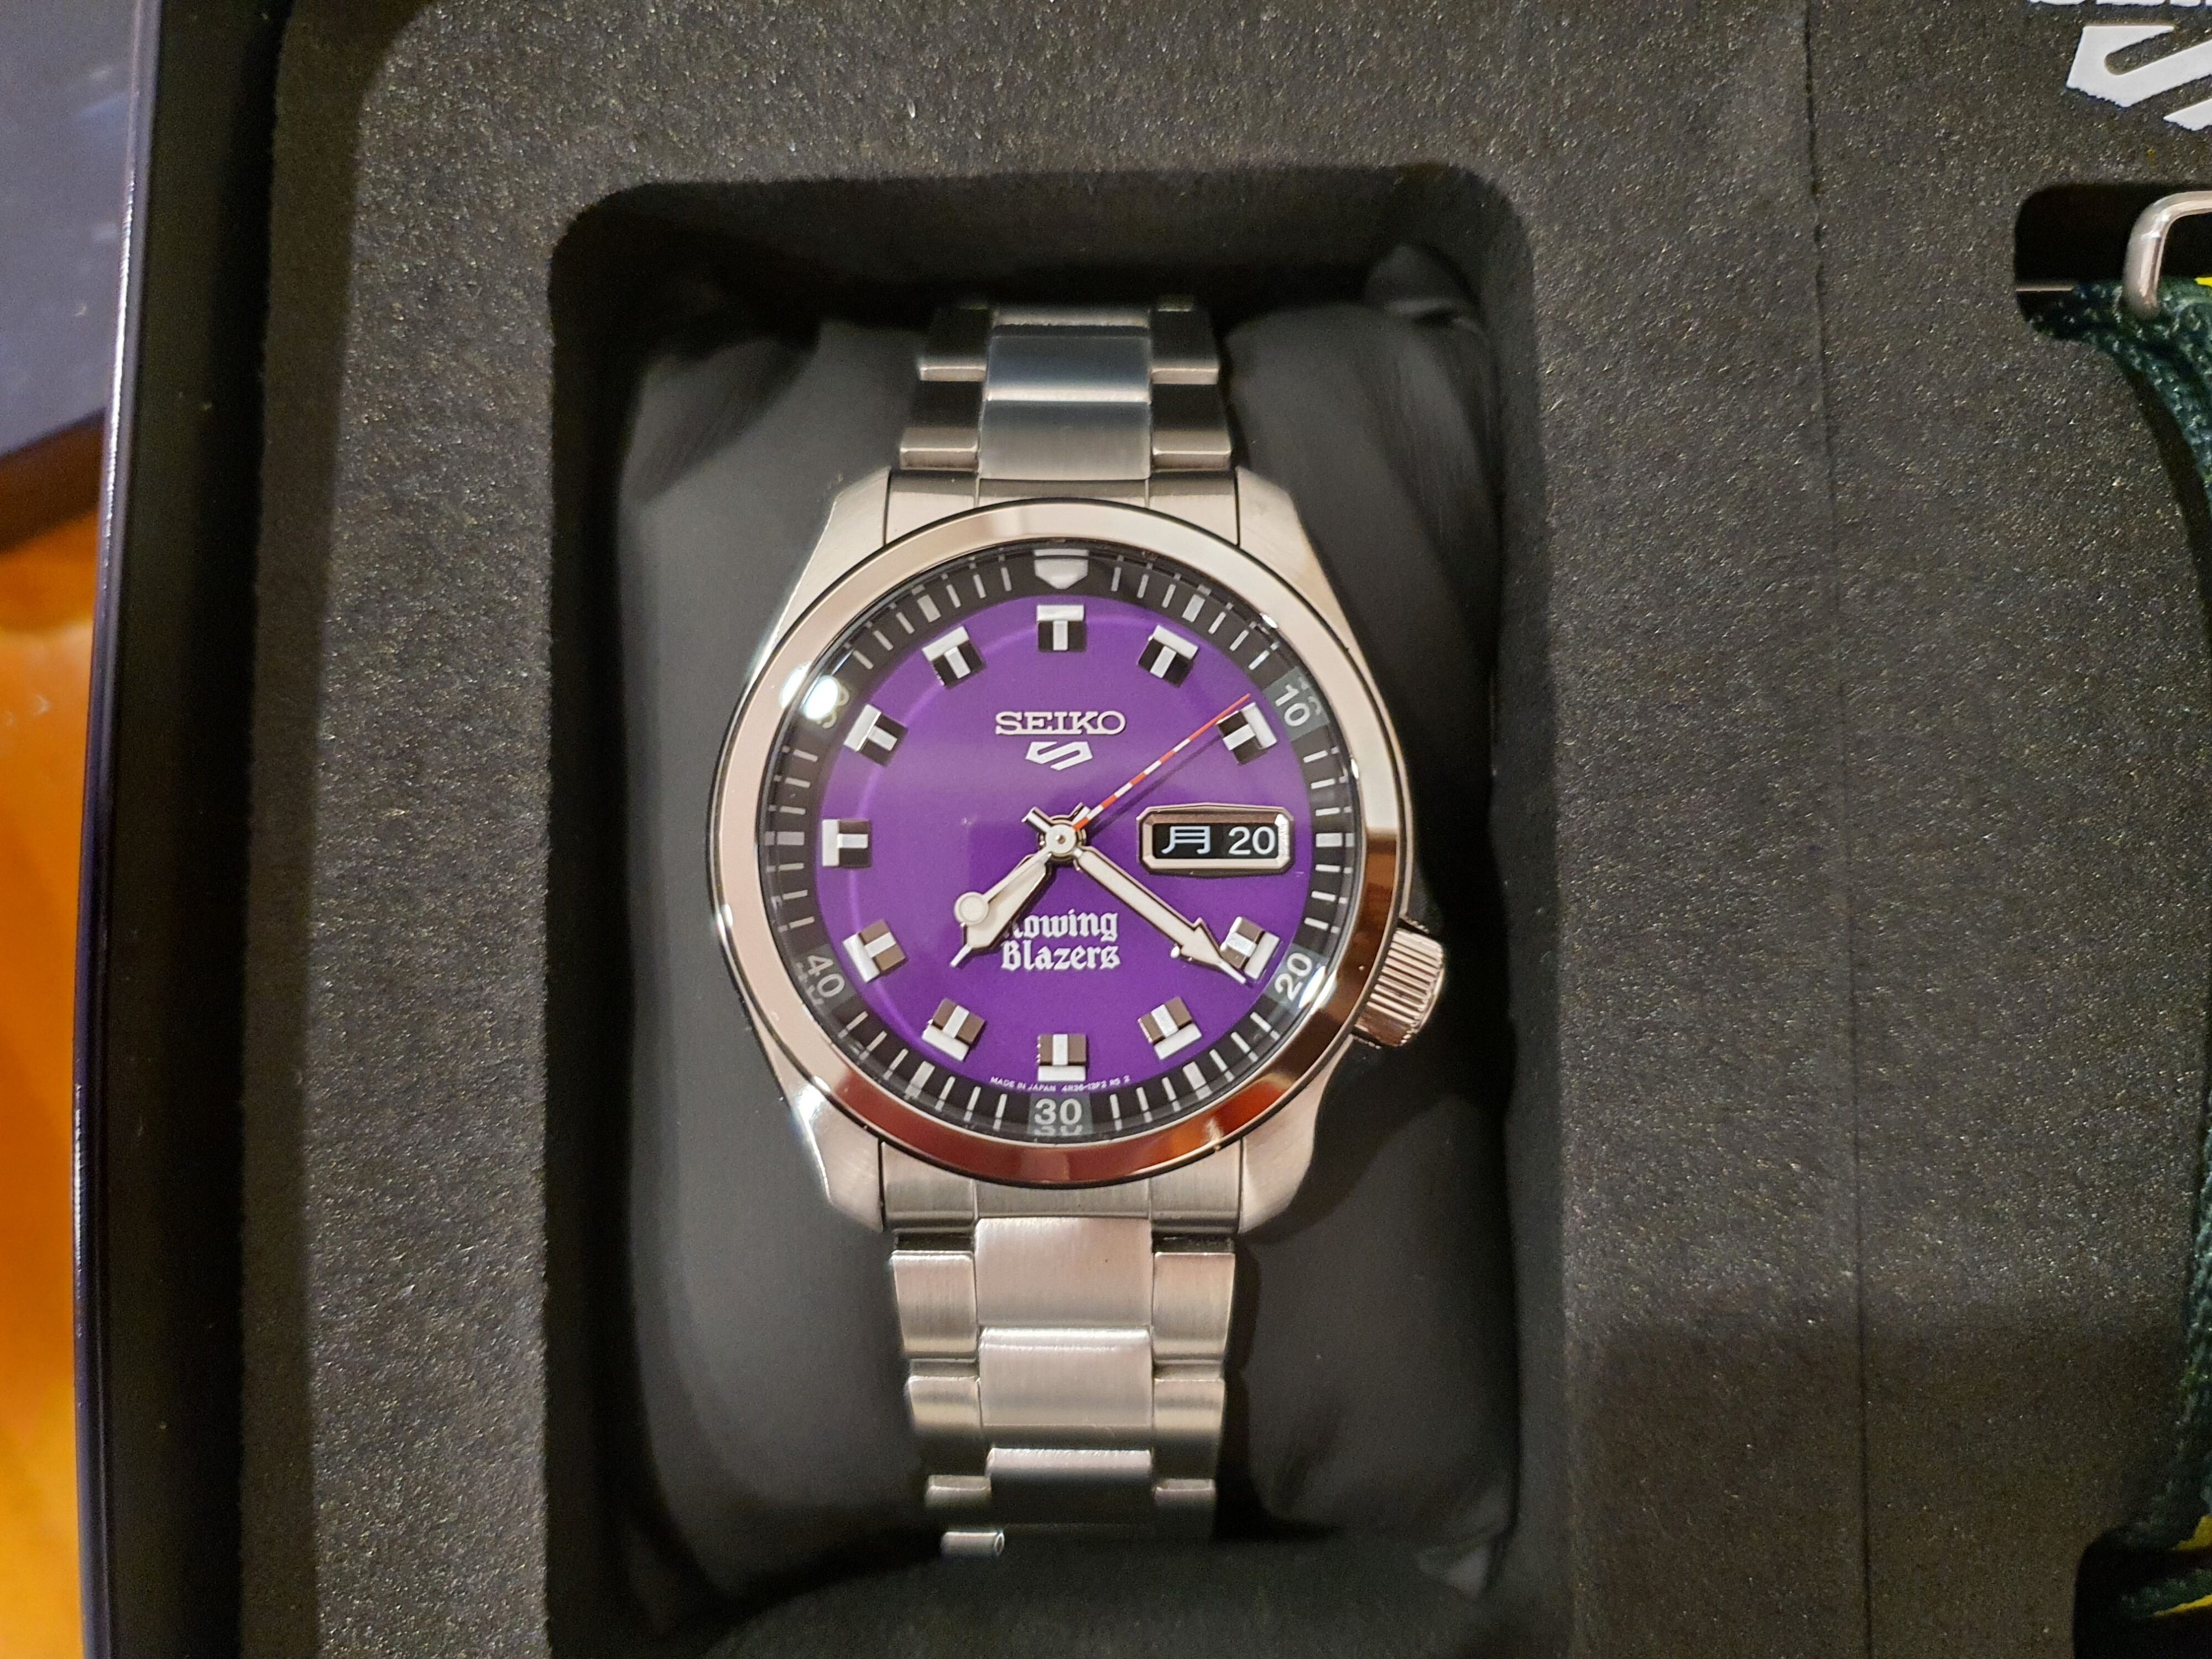 A close-up photo of the Seiko 5 x Rowing Blazers purple dial wristwatch